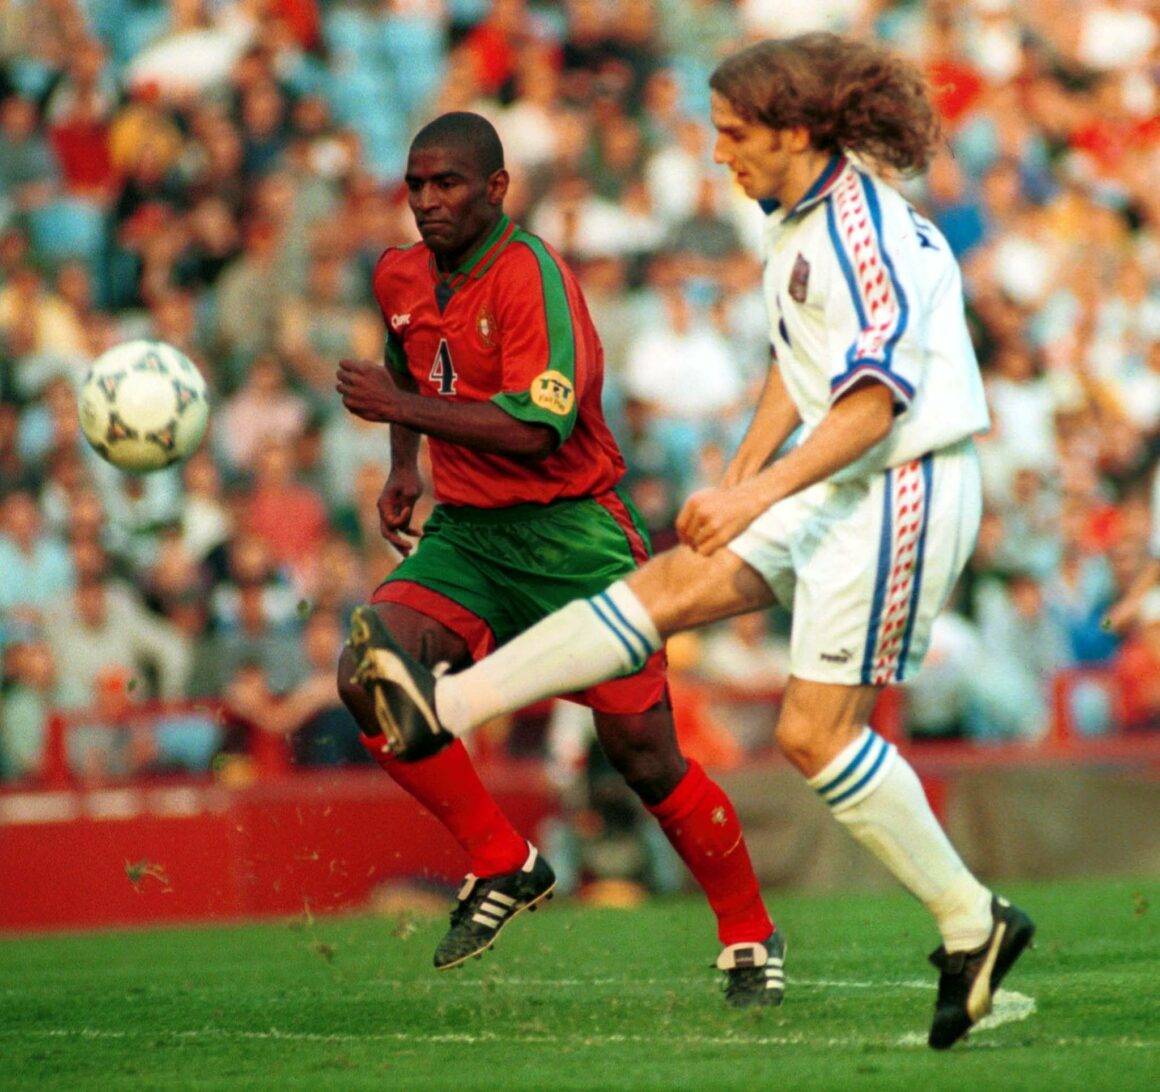 IMAGO / CTK Photo / Michal Dolezal | Czech soccer player Karel Poborsky (right) scores his famous goal in the quarterfinal of Euro 96 against Portugal in Birmingham on June 23, 1996, adding to the collection of Greatest Goals in UEFA EURO History.